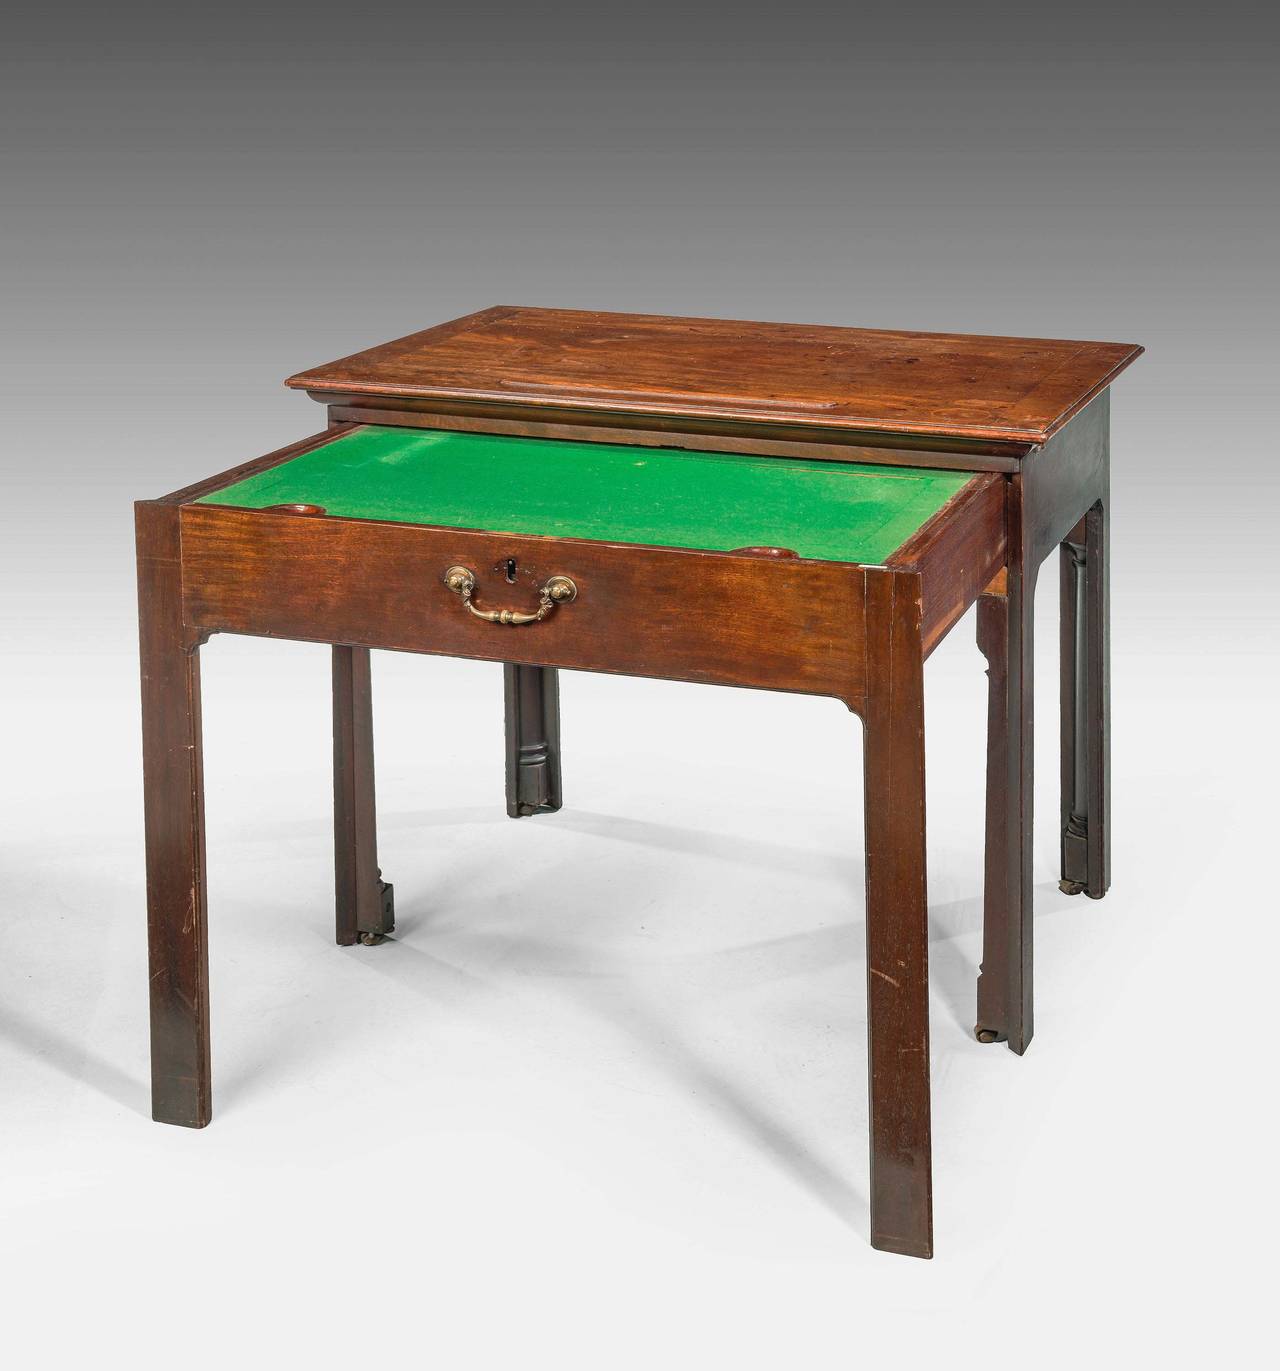 Mid-18th Century Chippendale Period Mahogany Architects Table